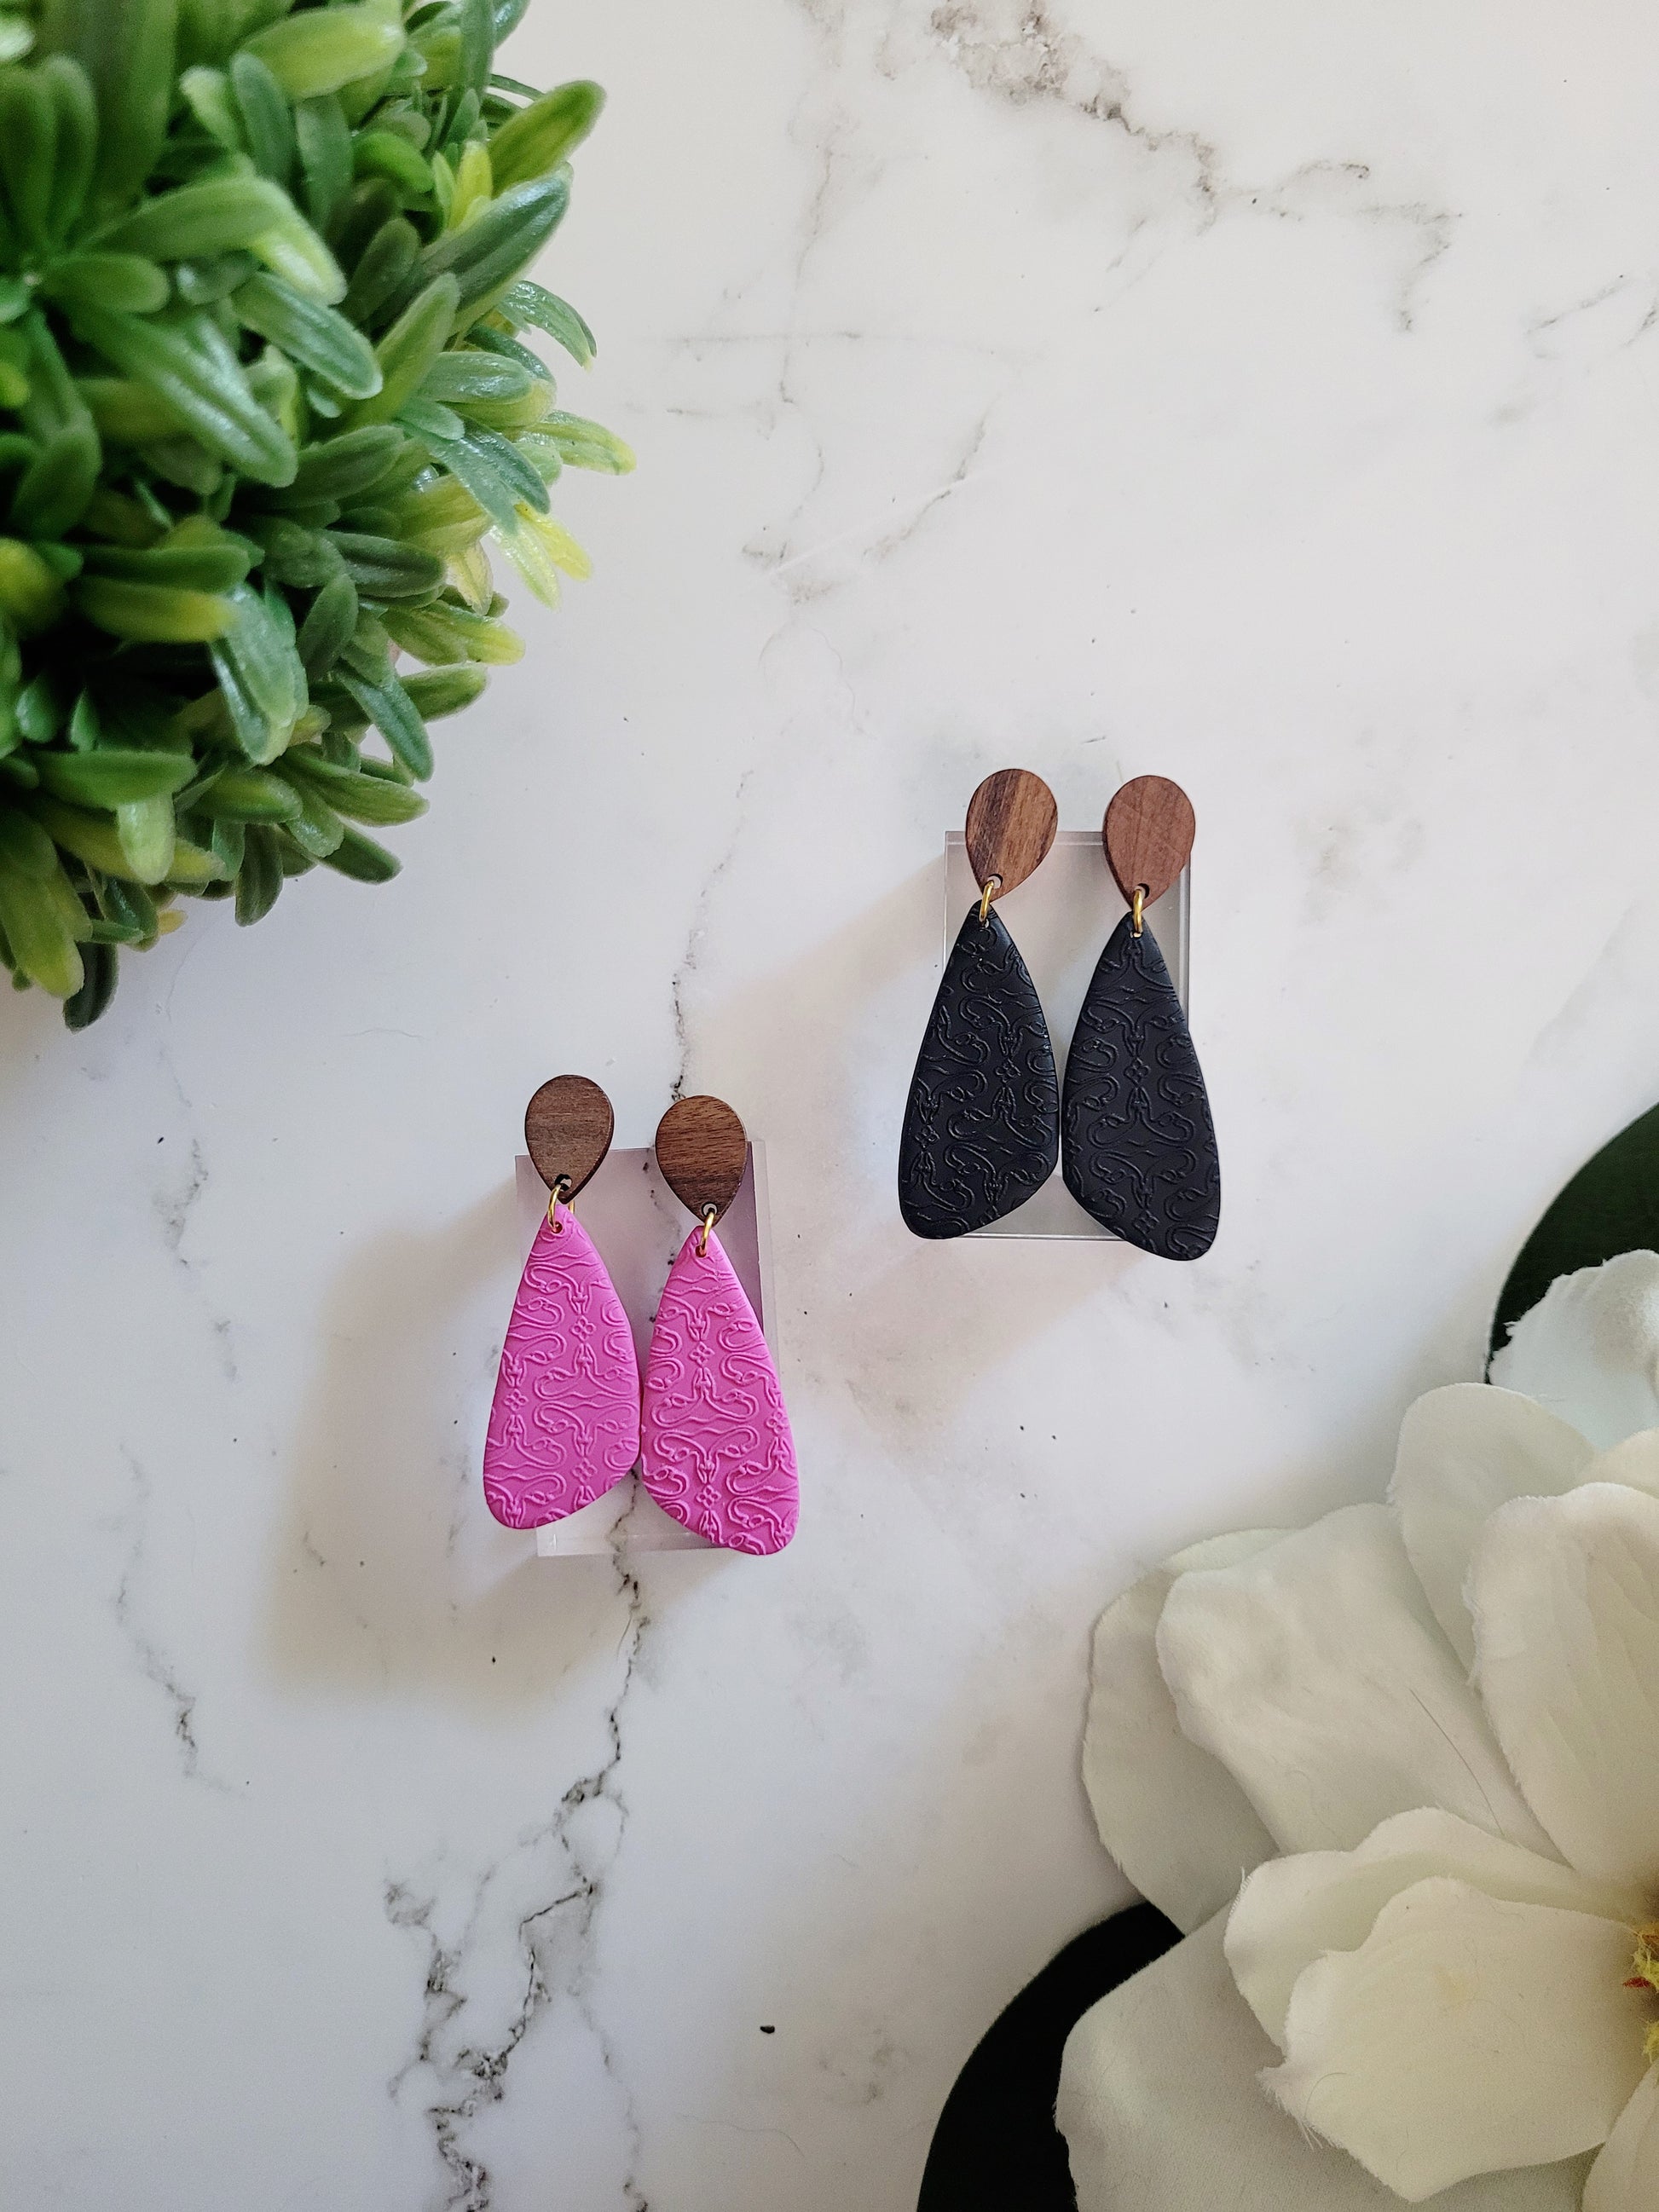 wood and clay earrings with uterus embossing.